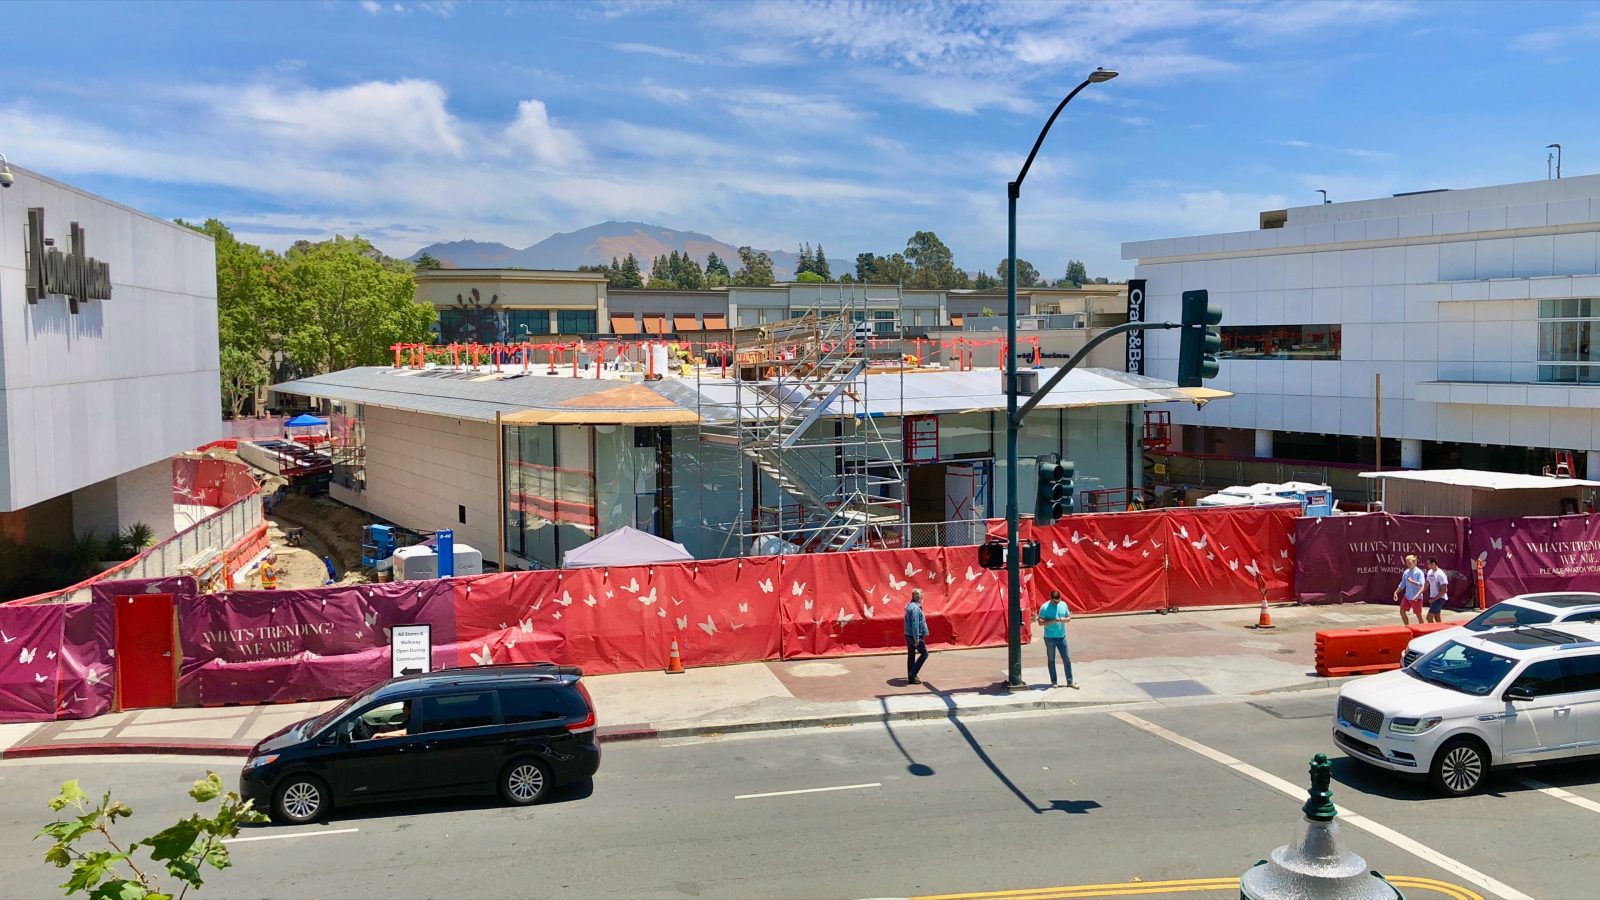 Gallery: New Apple store in Walnut Creek, CA takes shape with curved